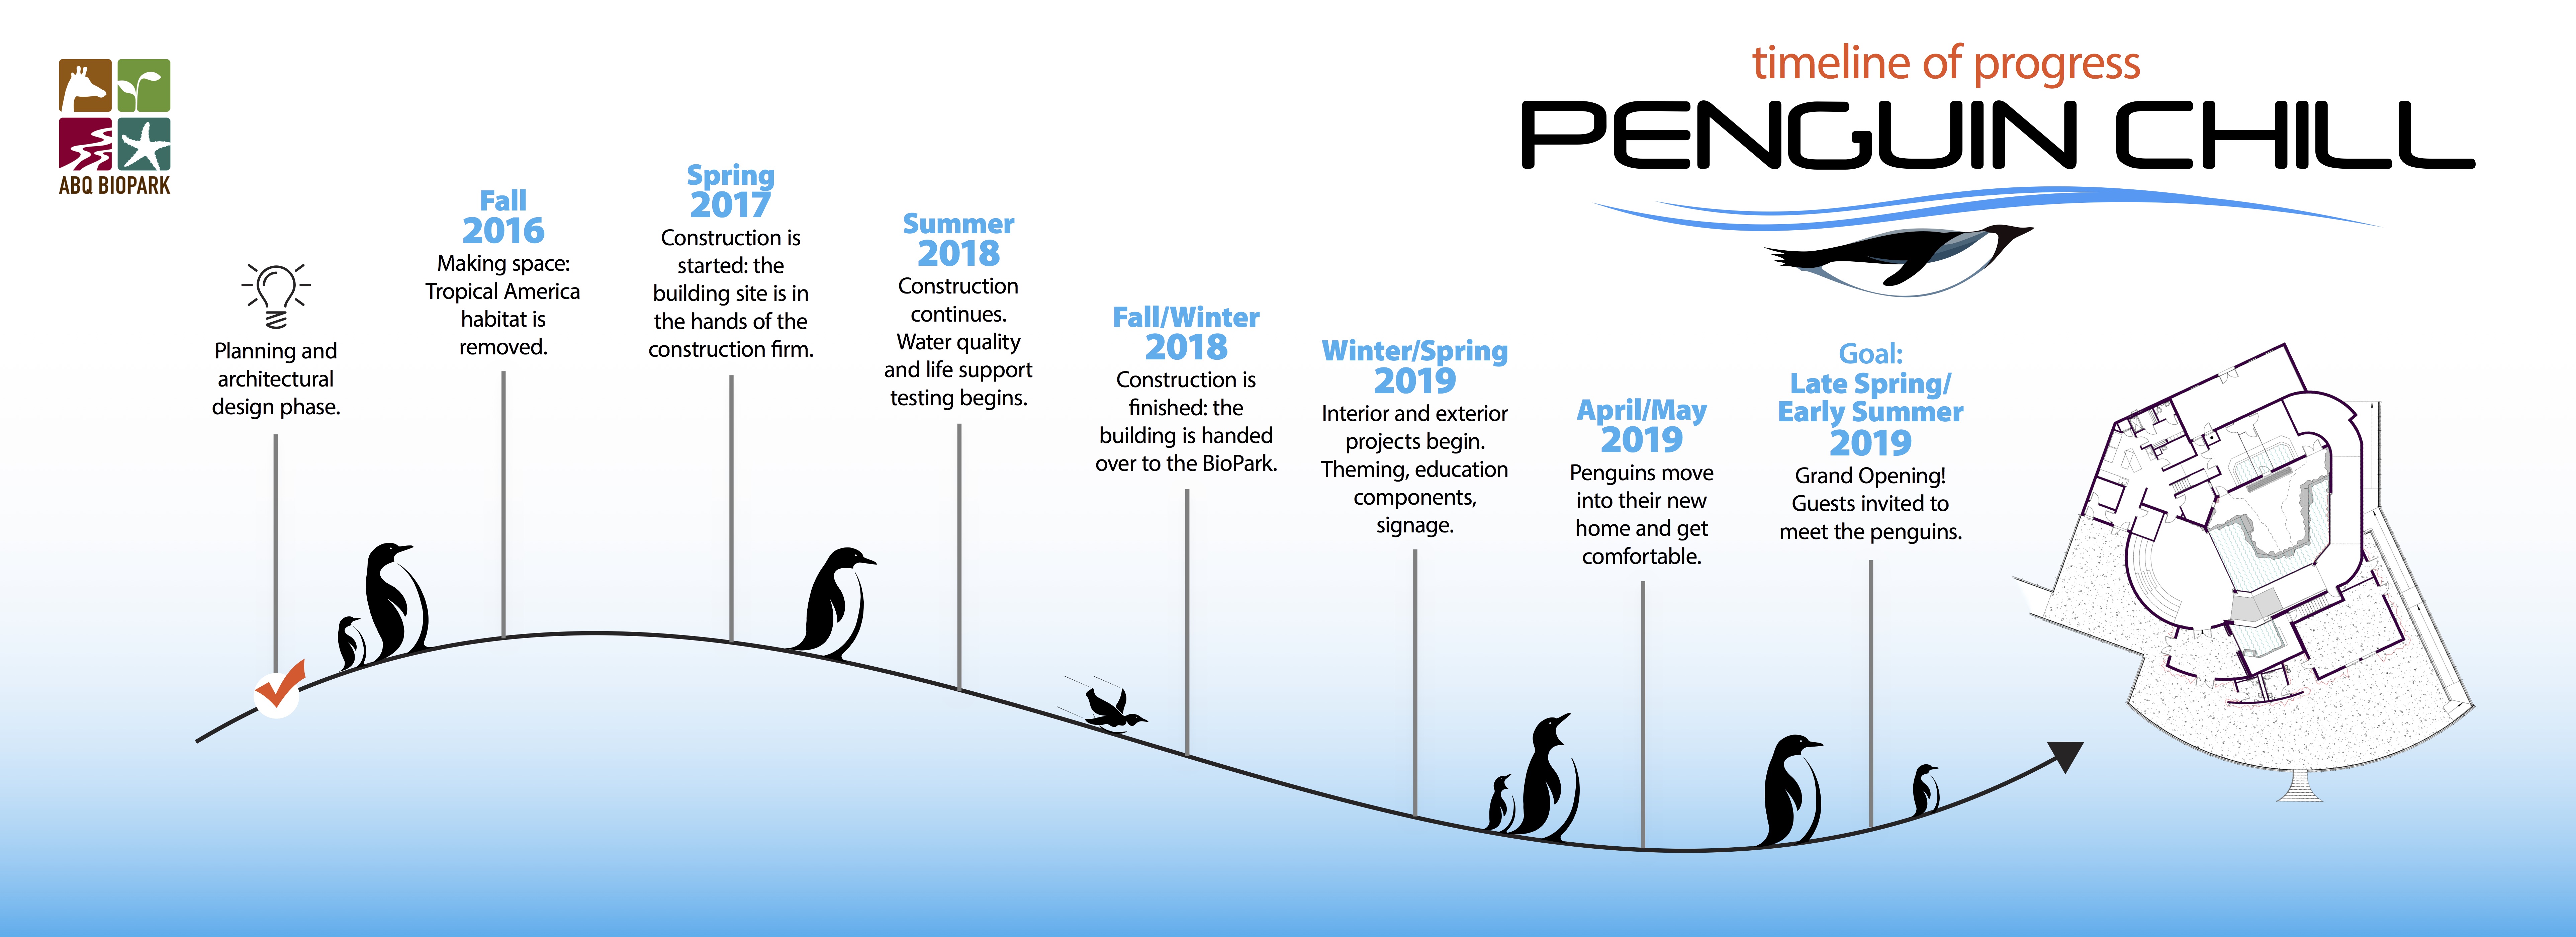 Penguin Chill Timeline - Updated Fall 2018